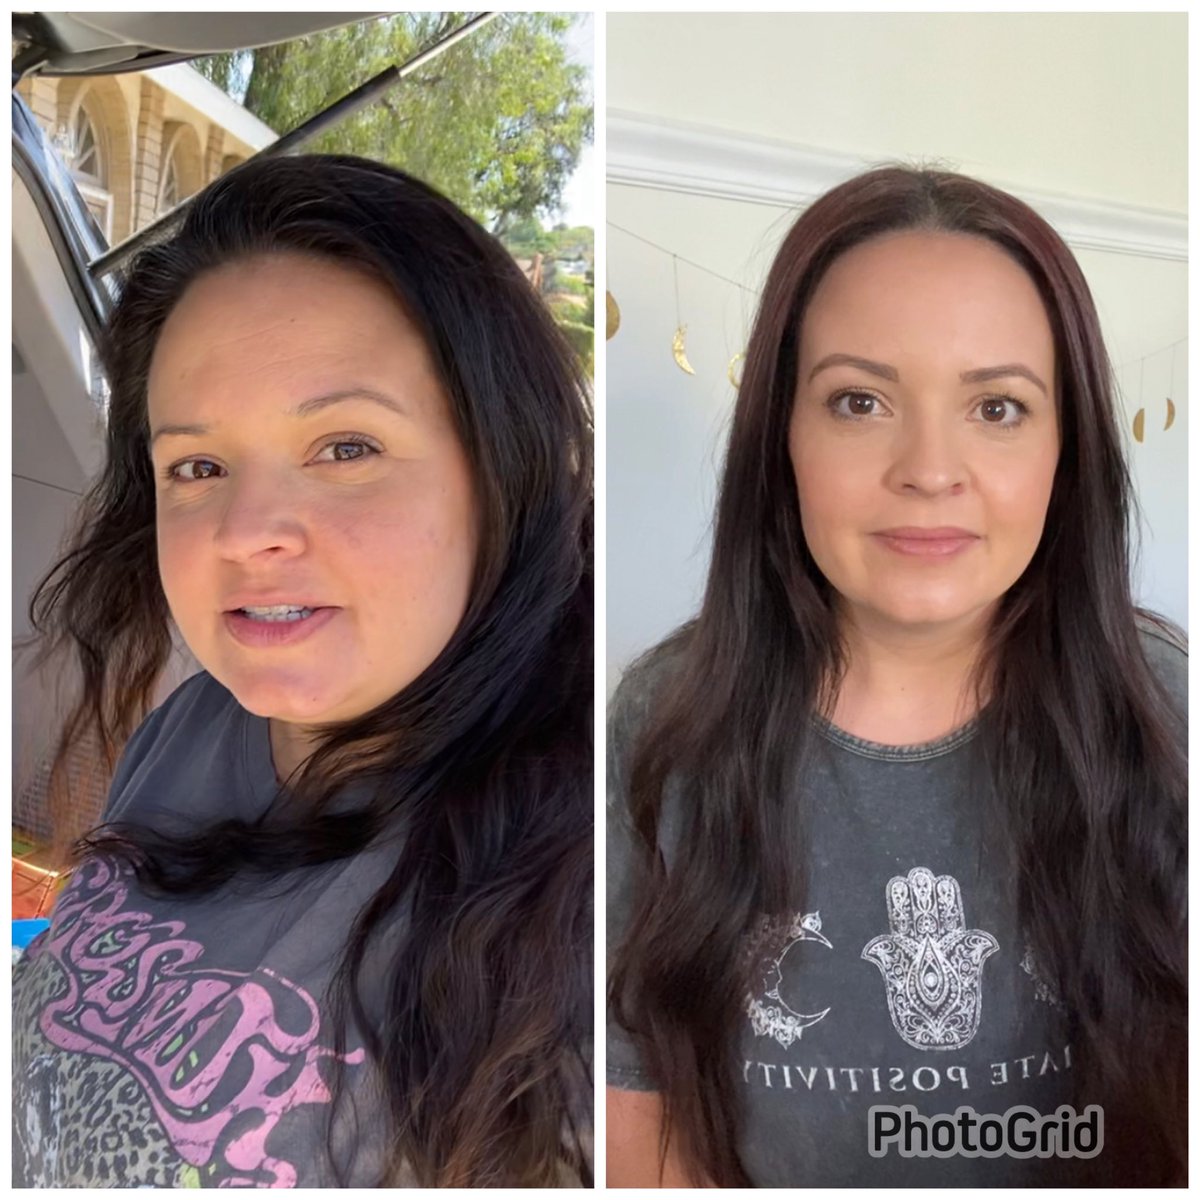 Still have a ways to go, but I’m proud of my journey so far. #carnivorediet #facetofacefriday #meatheals